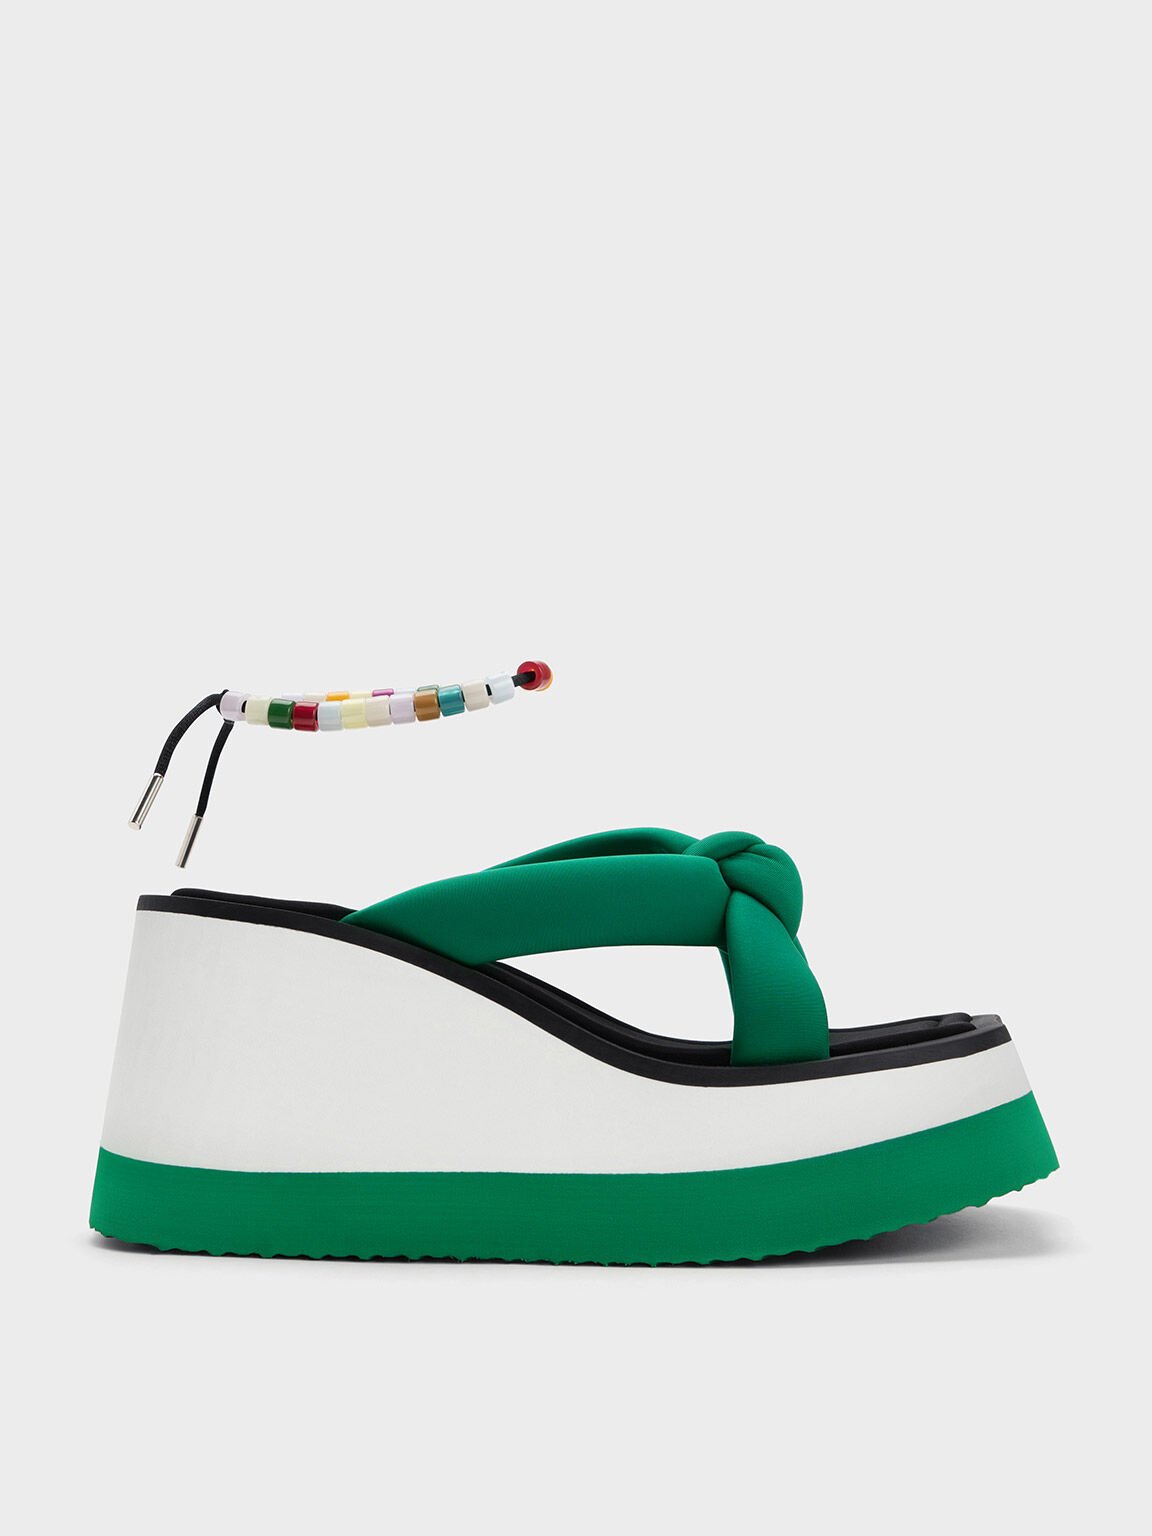 Tana Knotted Crossover Wedges, Green, hi-res